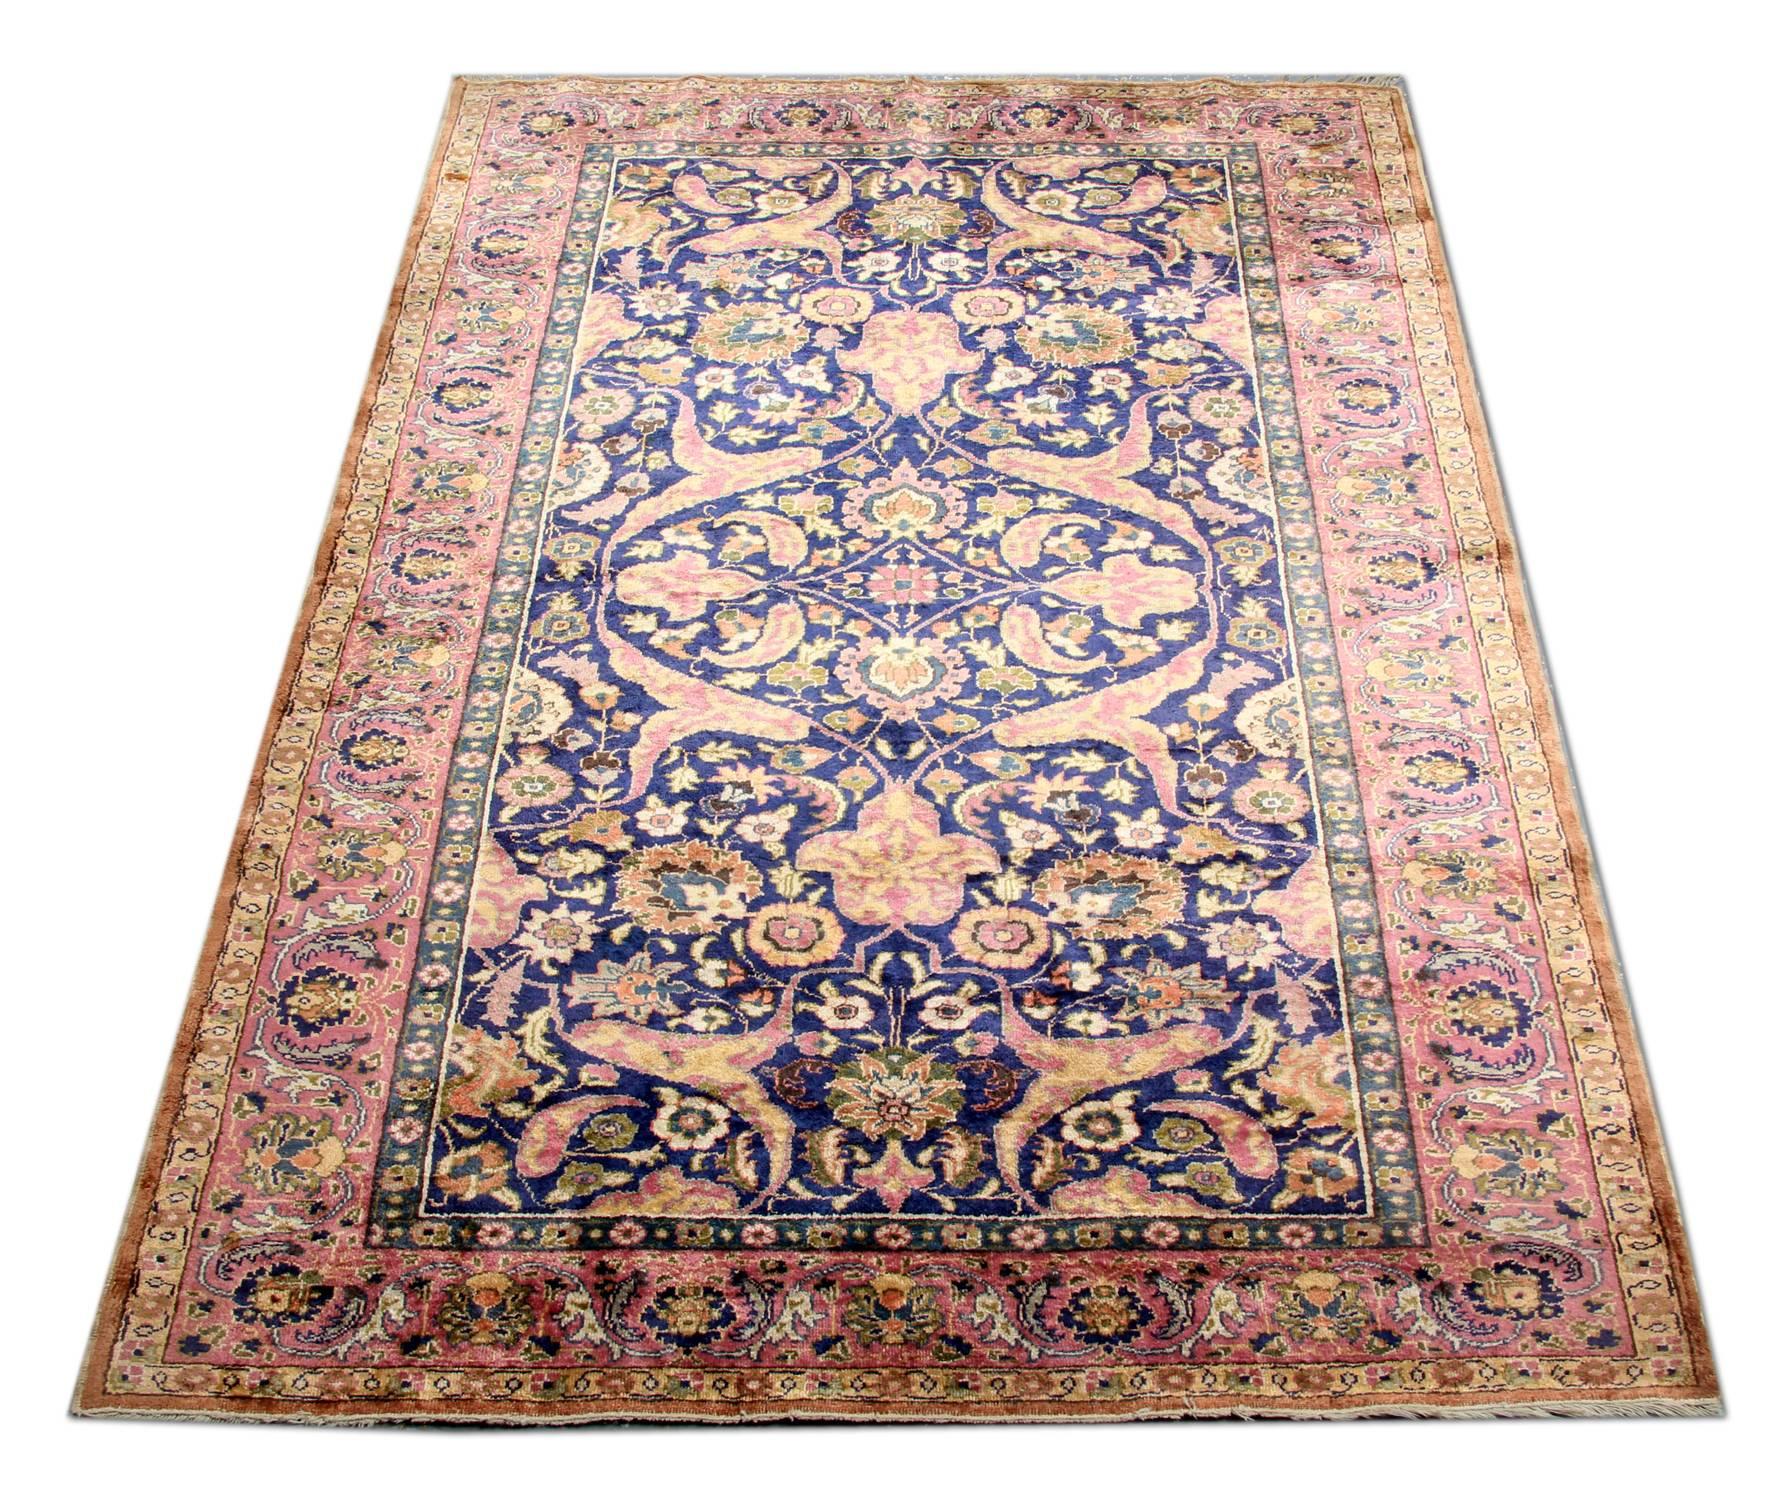 This is an example of handmade carpet finely hand knotted vintage rugs from Central Anatolia with a Classic all-over floral rug design of small patterns. The high-quality wool pile on a strong silk foundation and excellent original condition let